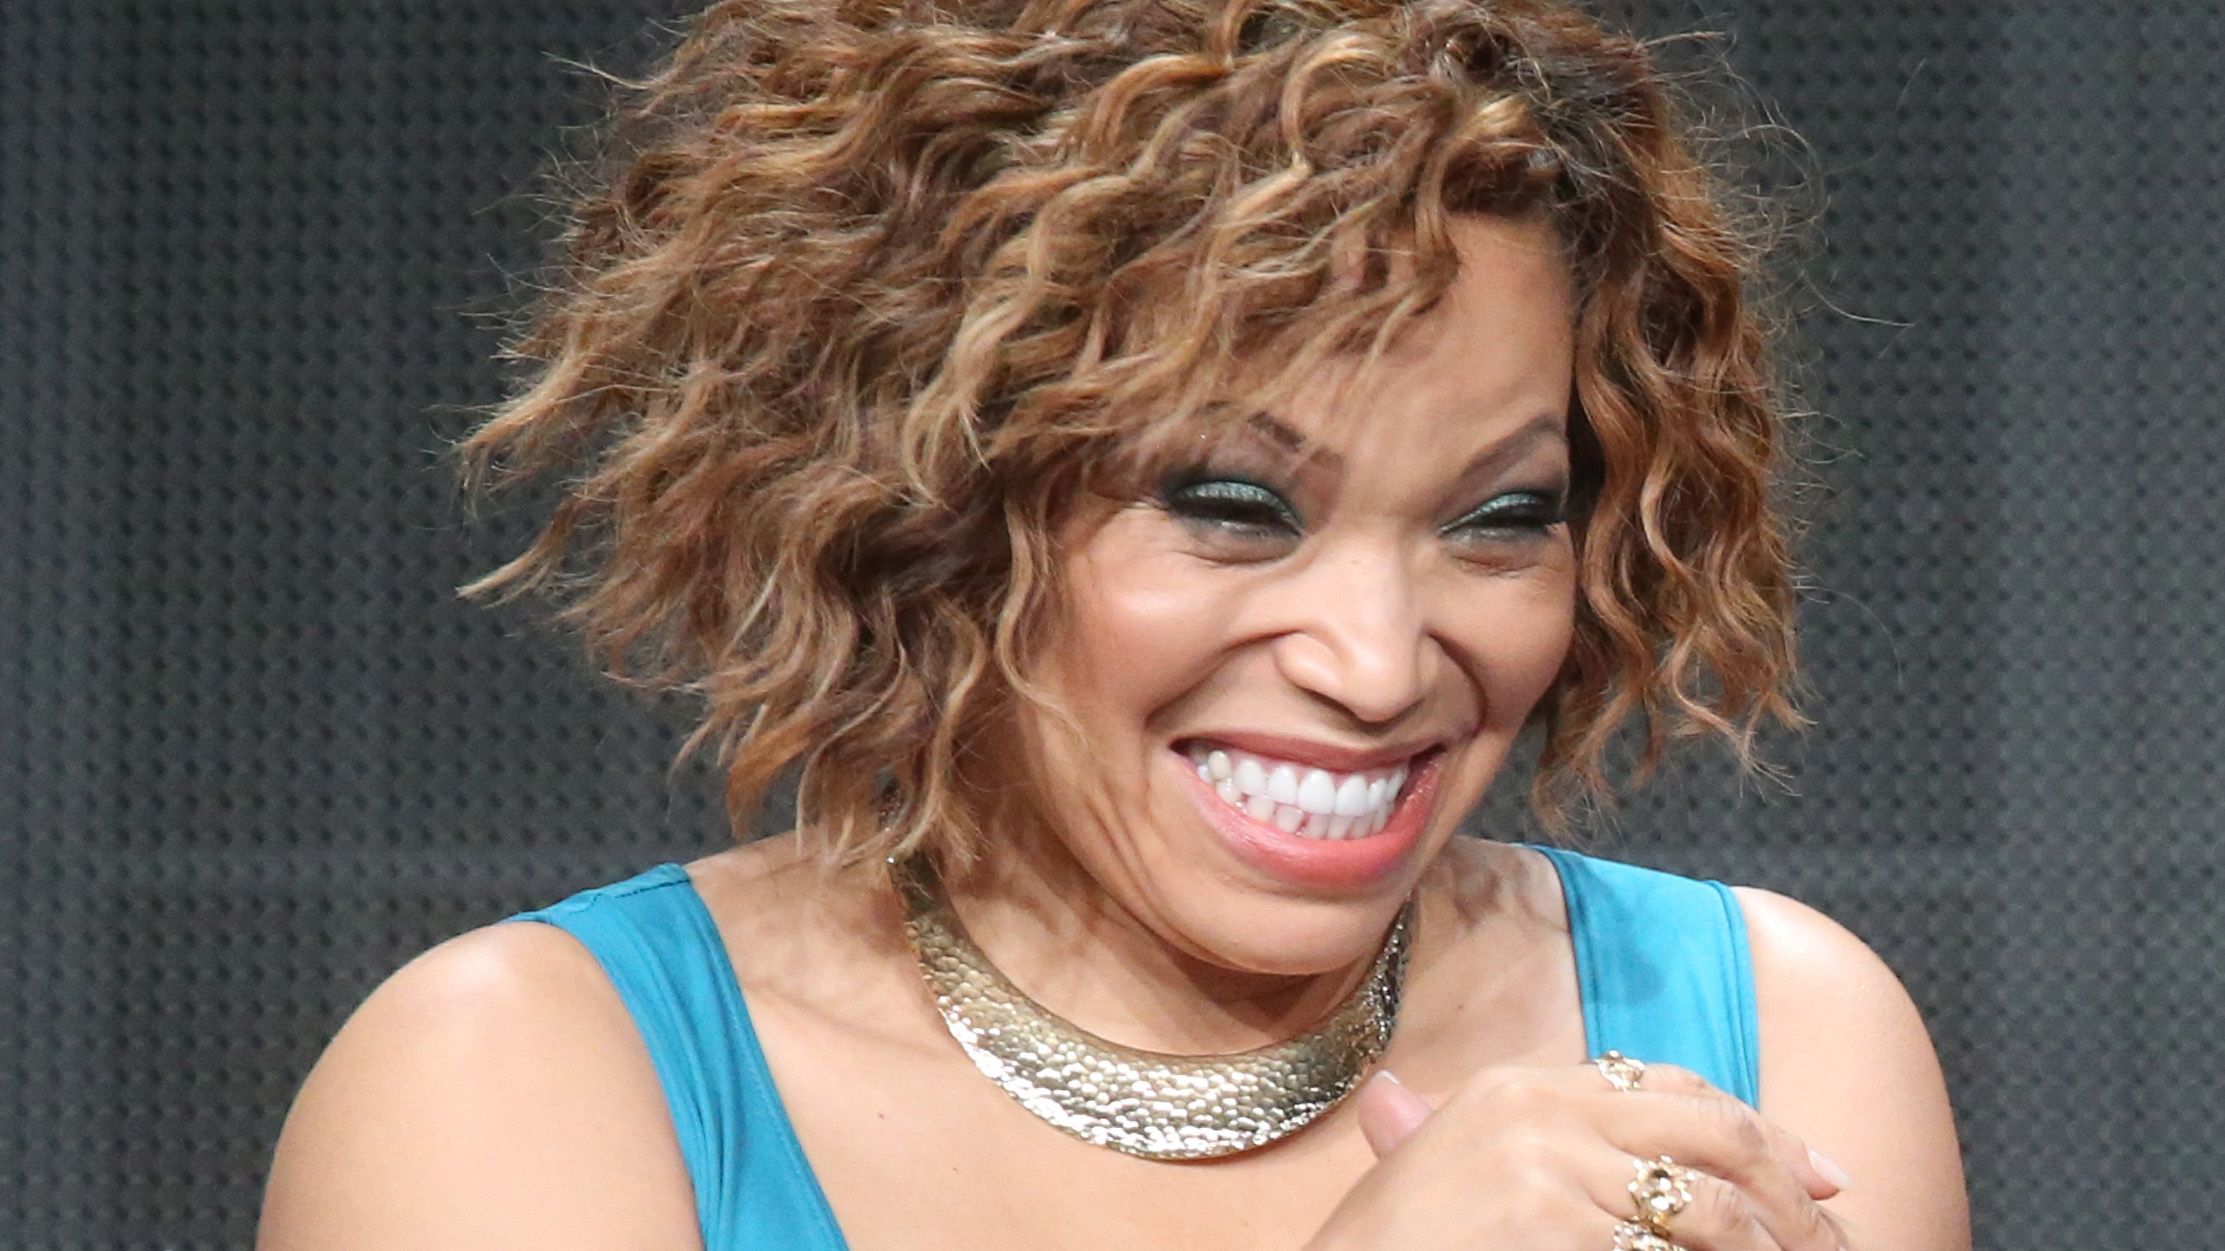 Tisha Campbell Net Worth 2022 - Early Life, Career, Love Life, and More!